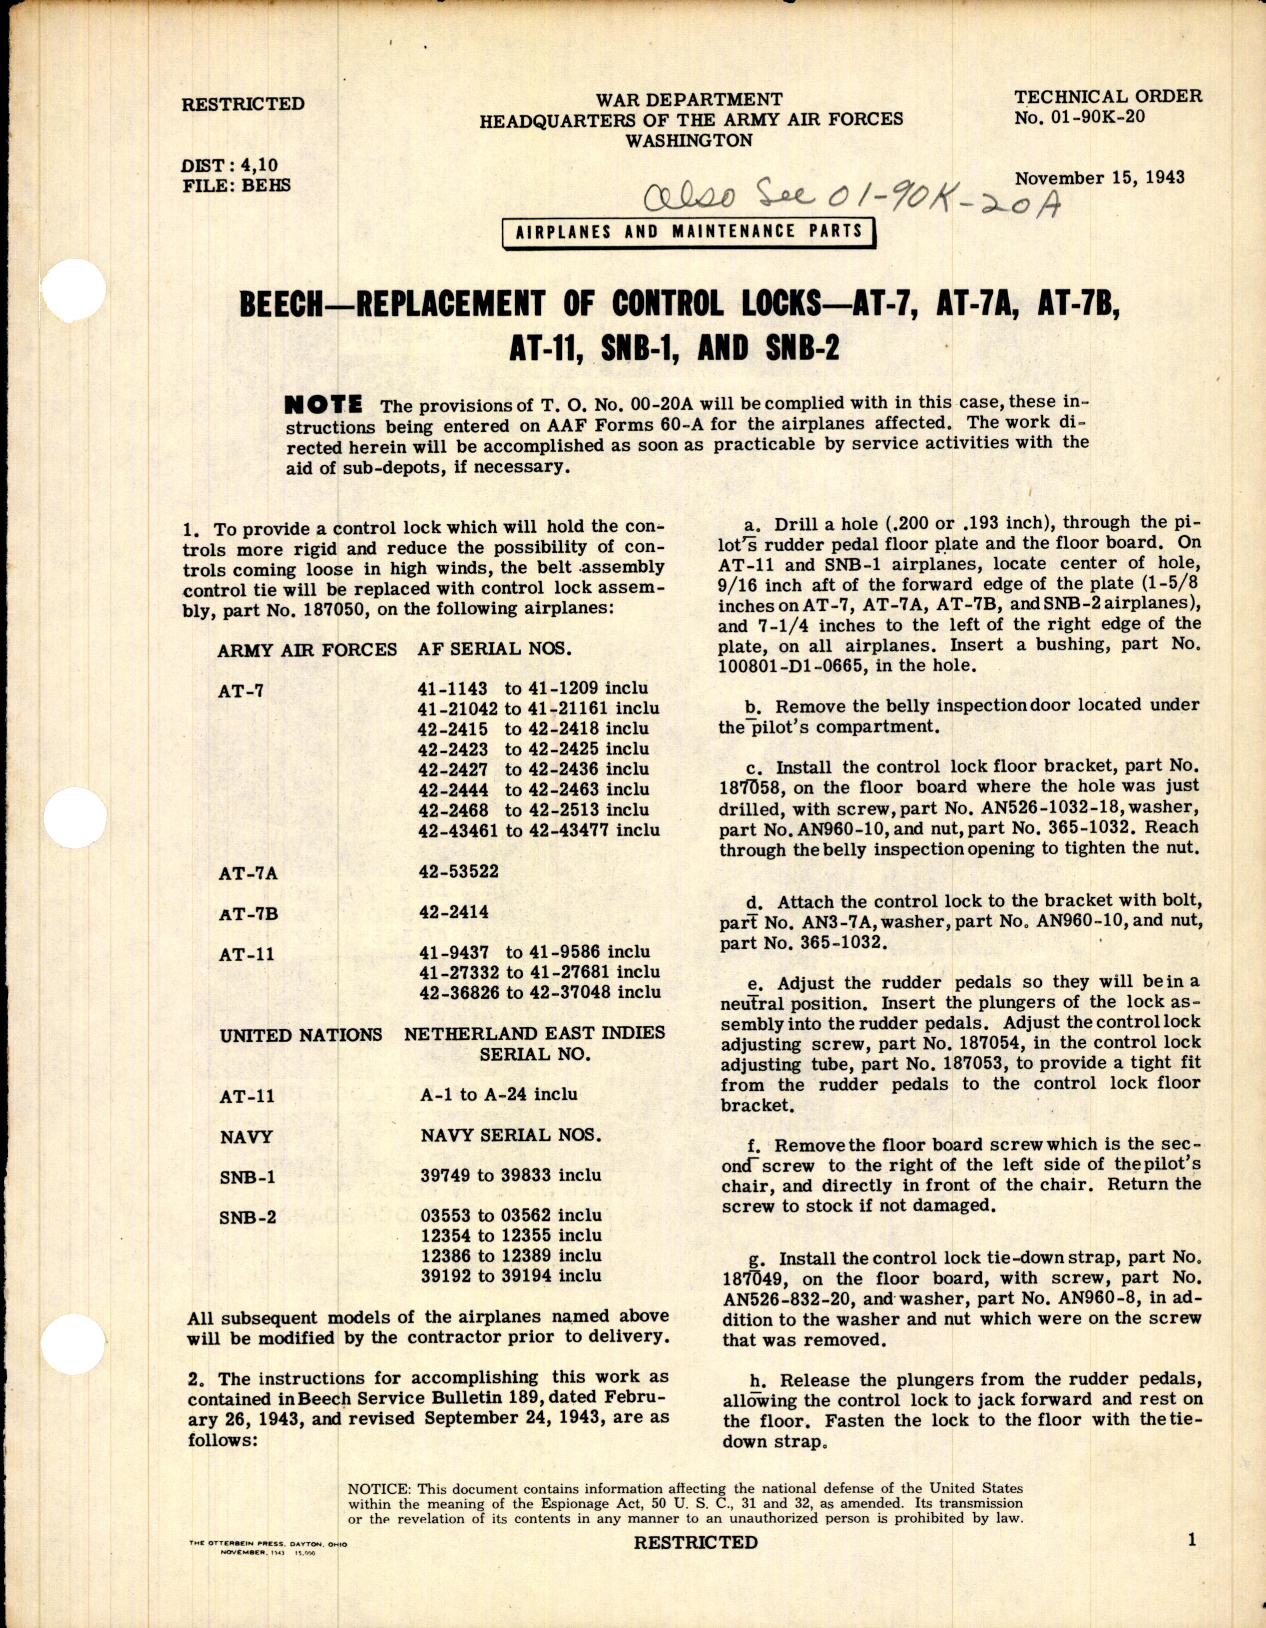 Sample page 1 from AirCorps Library document: Replacement of Control Locks for AT-7, AT-7A, AT-7B, AT-11, SNB-1, and SNB-2